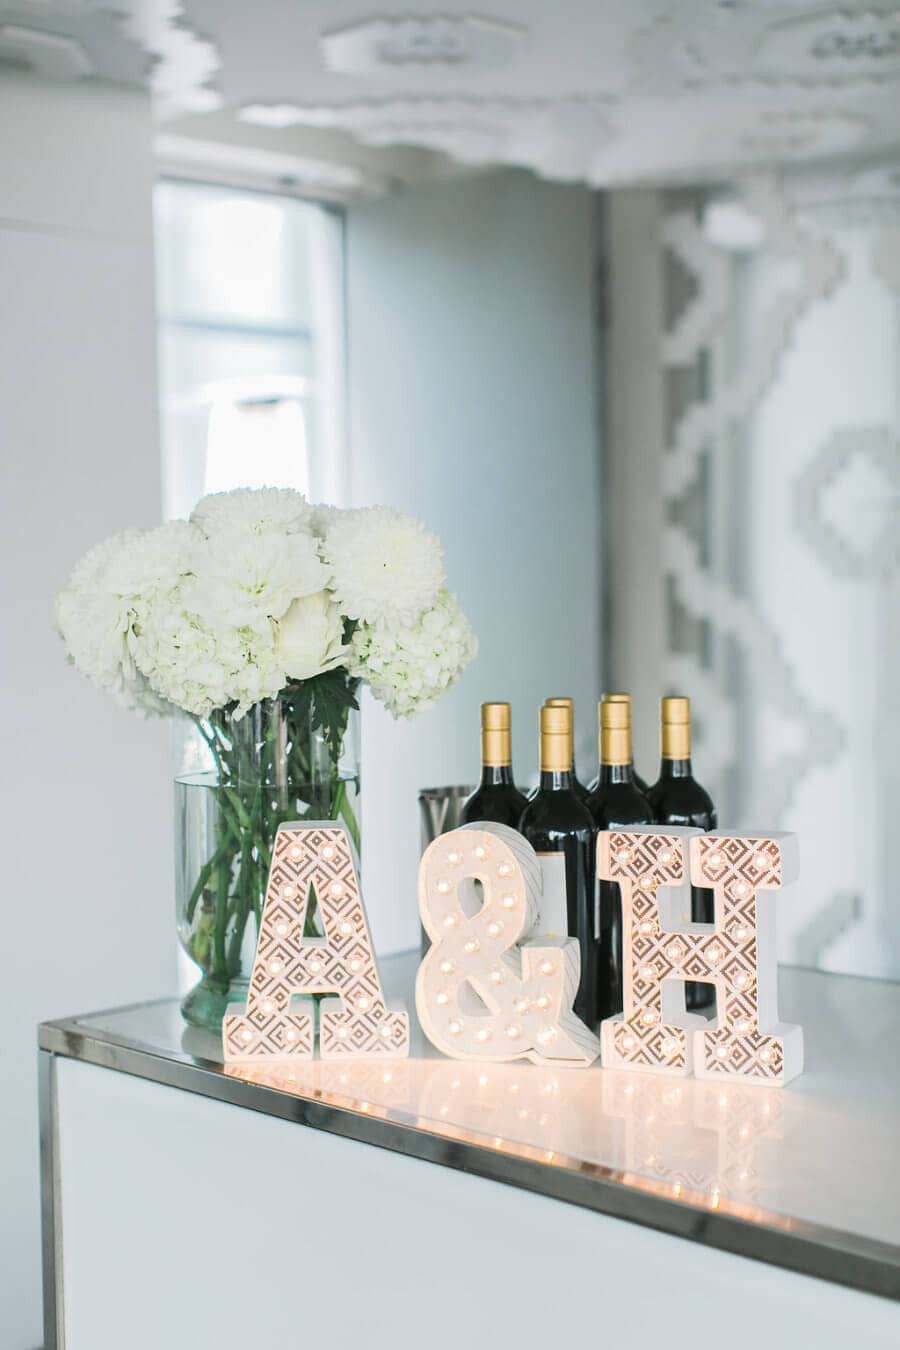 Engagement Party Themes And Ideas
 25 Amazing DIY Engagement Party Decoration Ideas for 2020